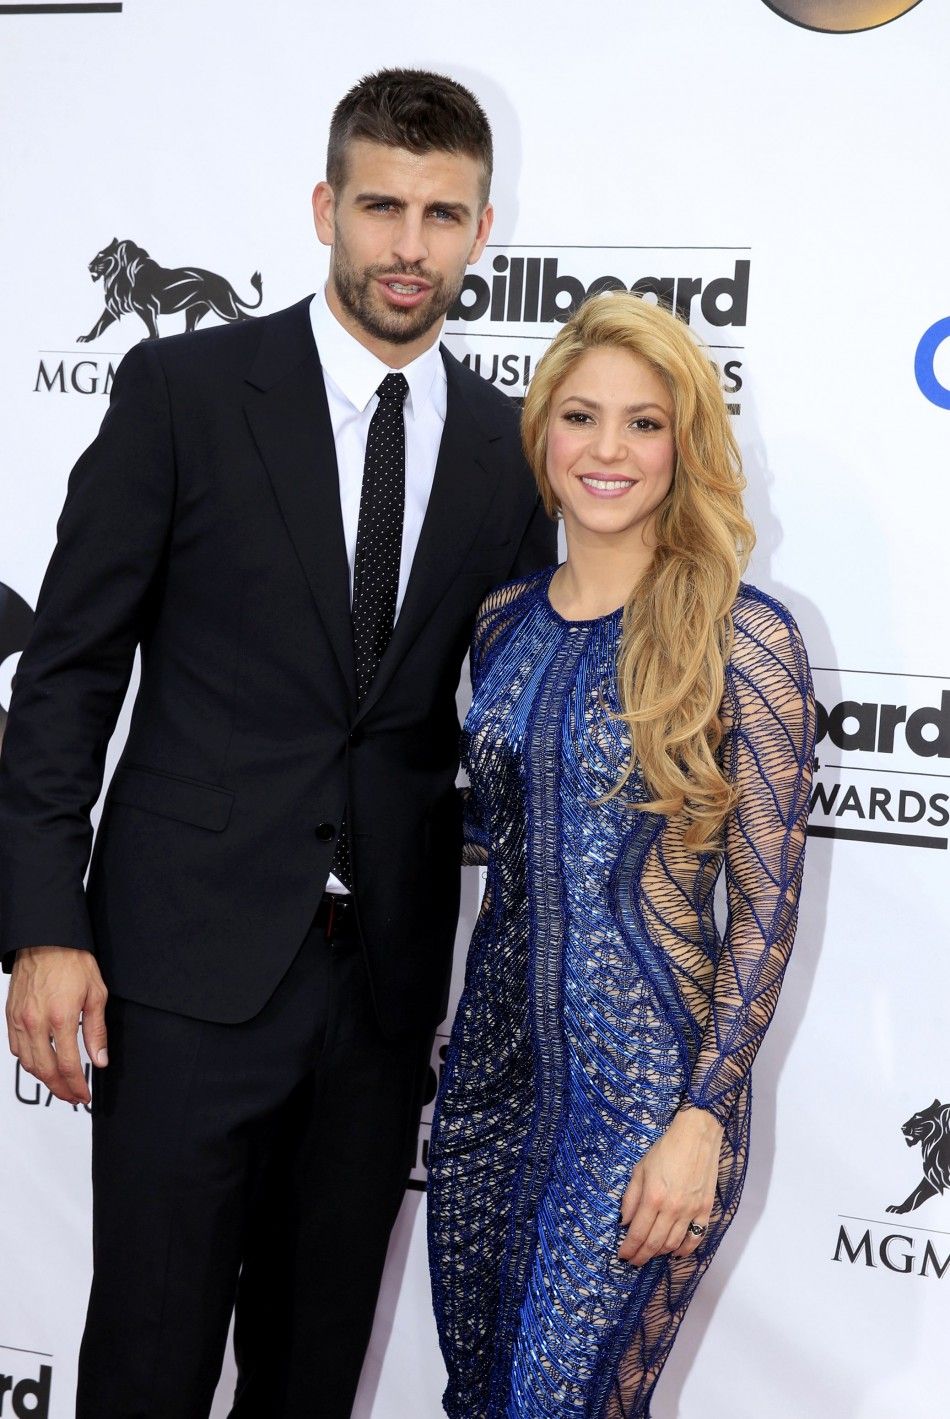 Singer-songwriter Shakira and professional soccer player Gerard Pique arrive at the 2014 Billboard Music Awards in Las Vegas, Nevada May 18, 2014.   REUTERSL.E. Baskow 